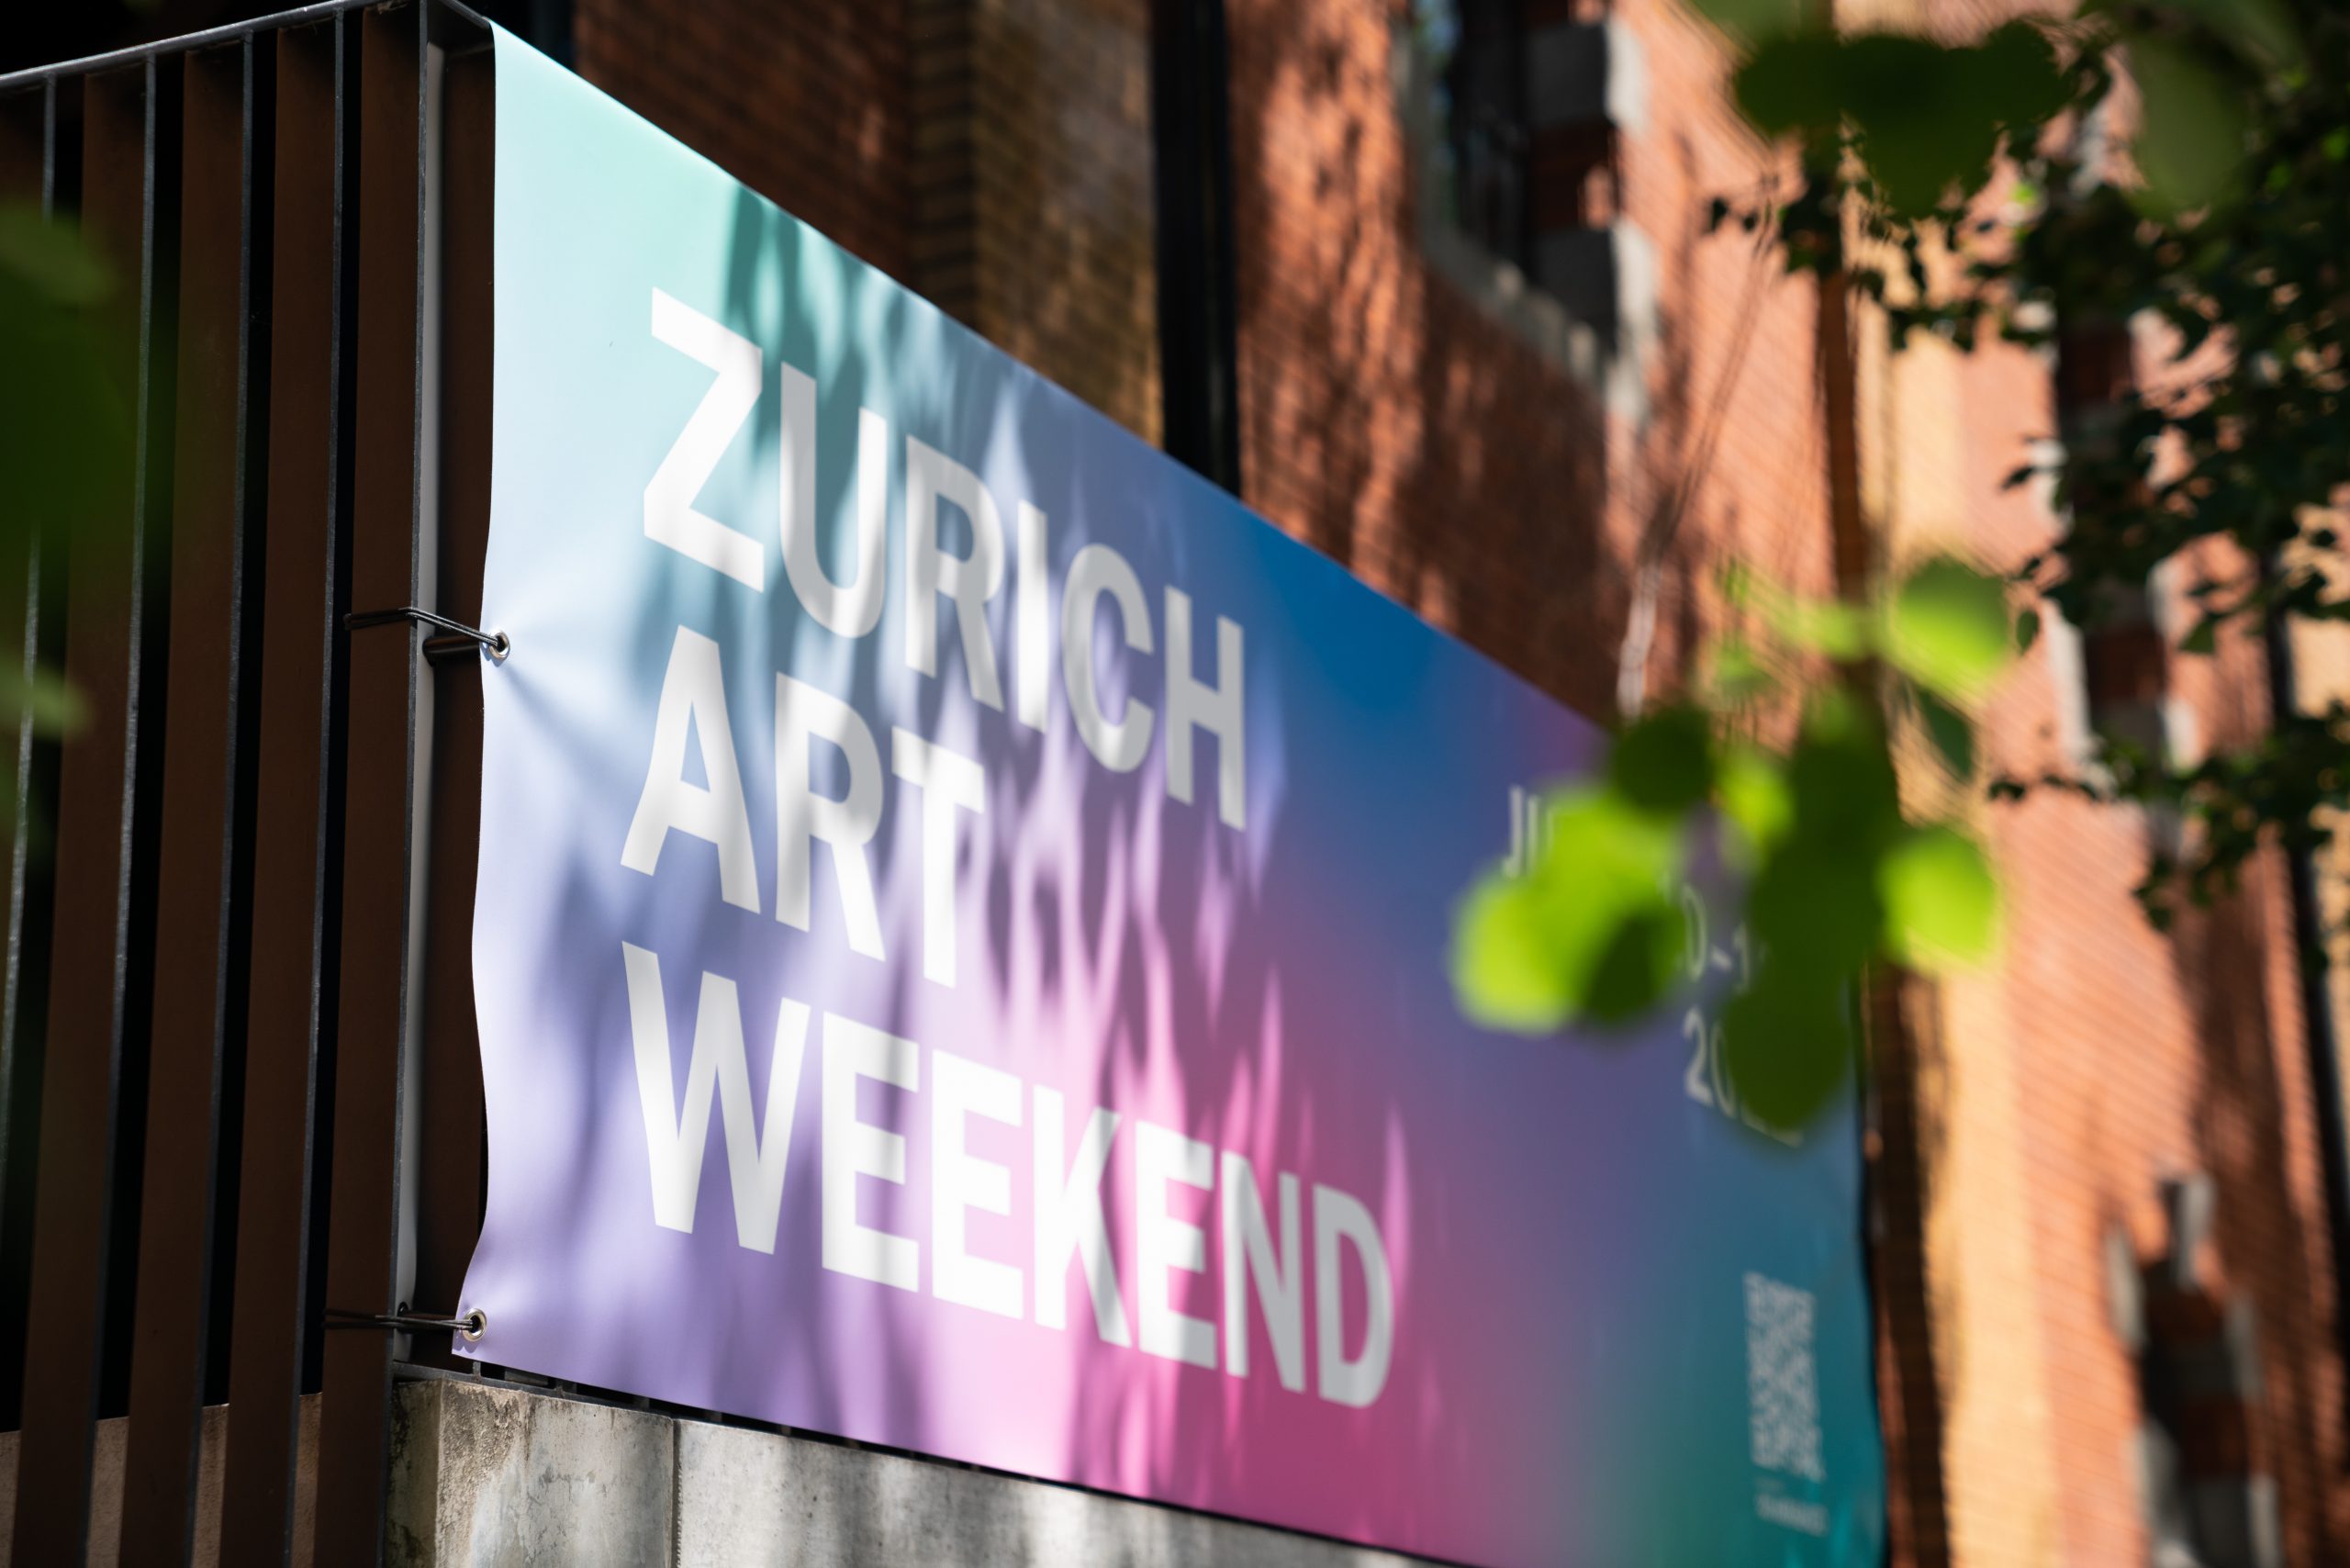 Zurich Art Week will be all about AI, with techcentred art shows